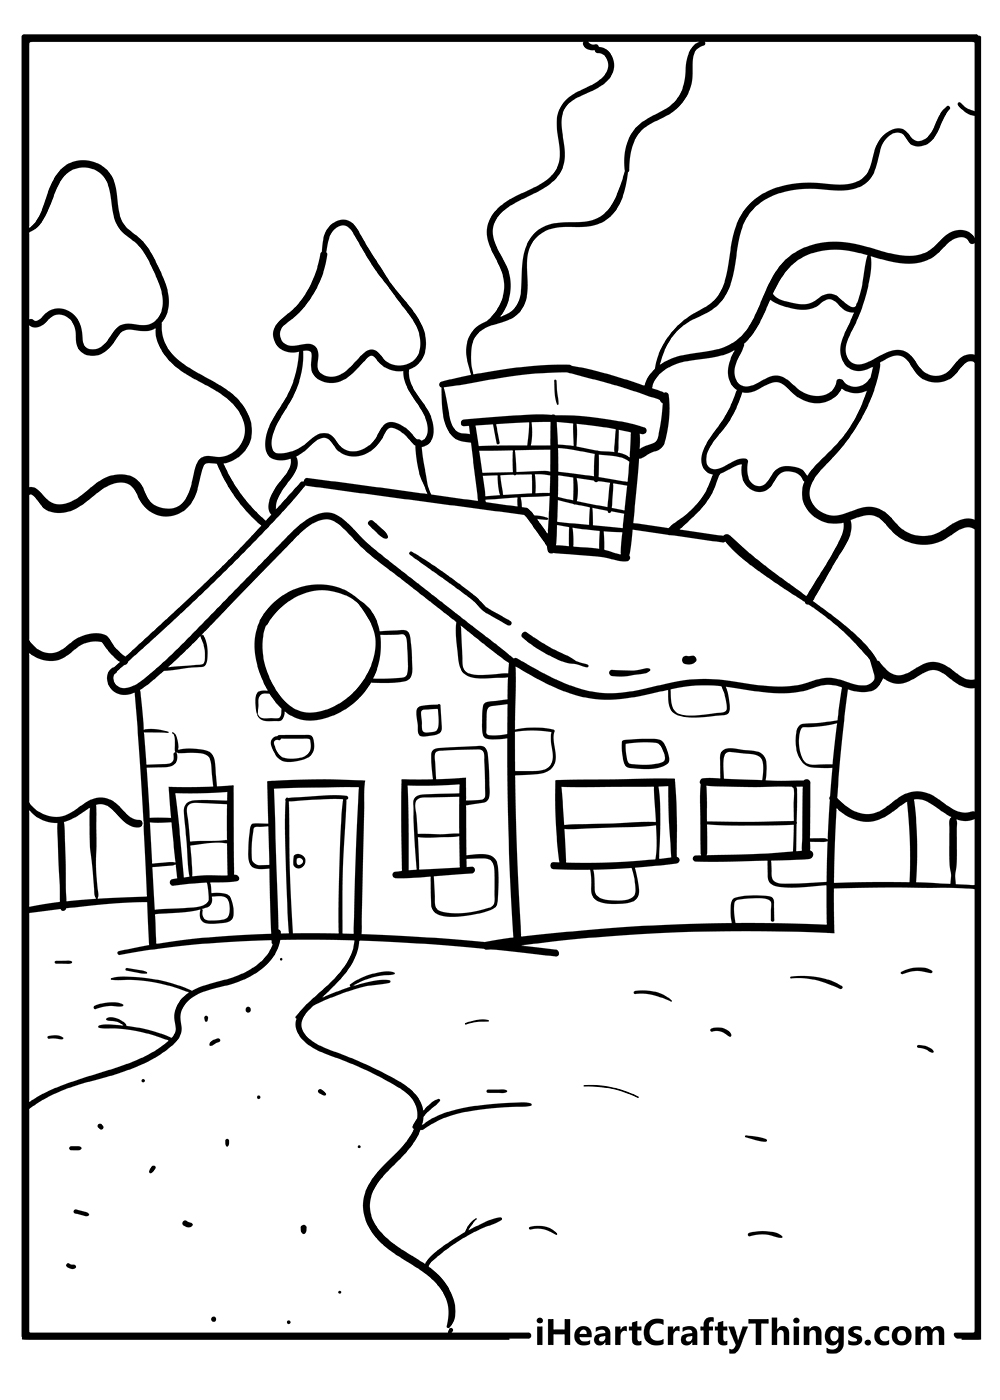 House Coloring Book for adults free download